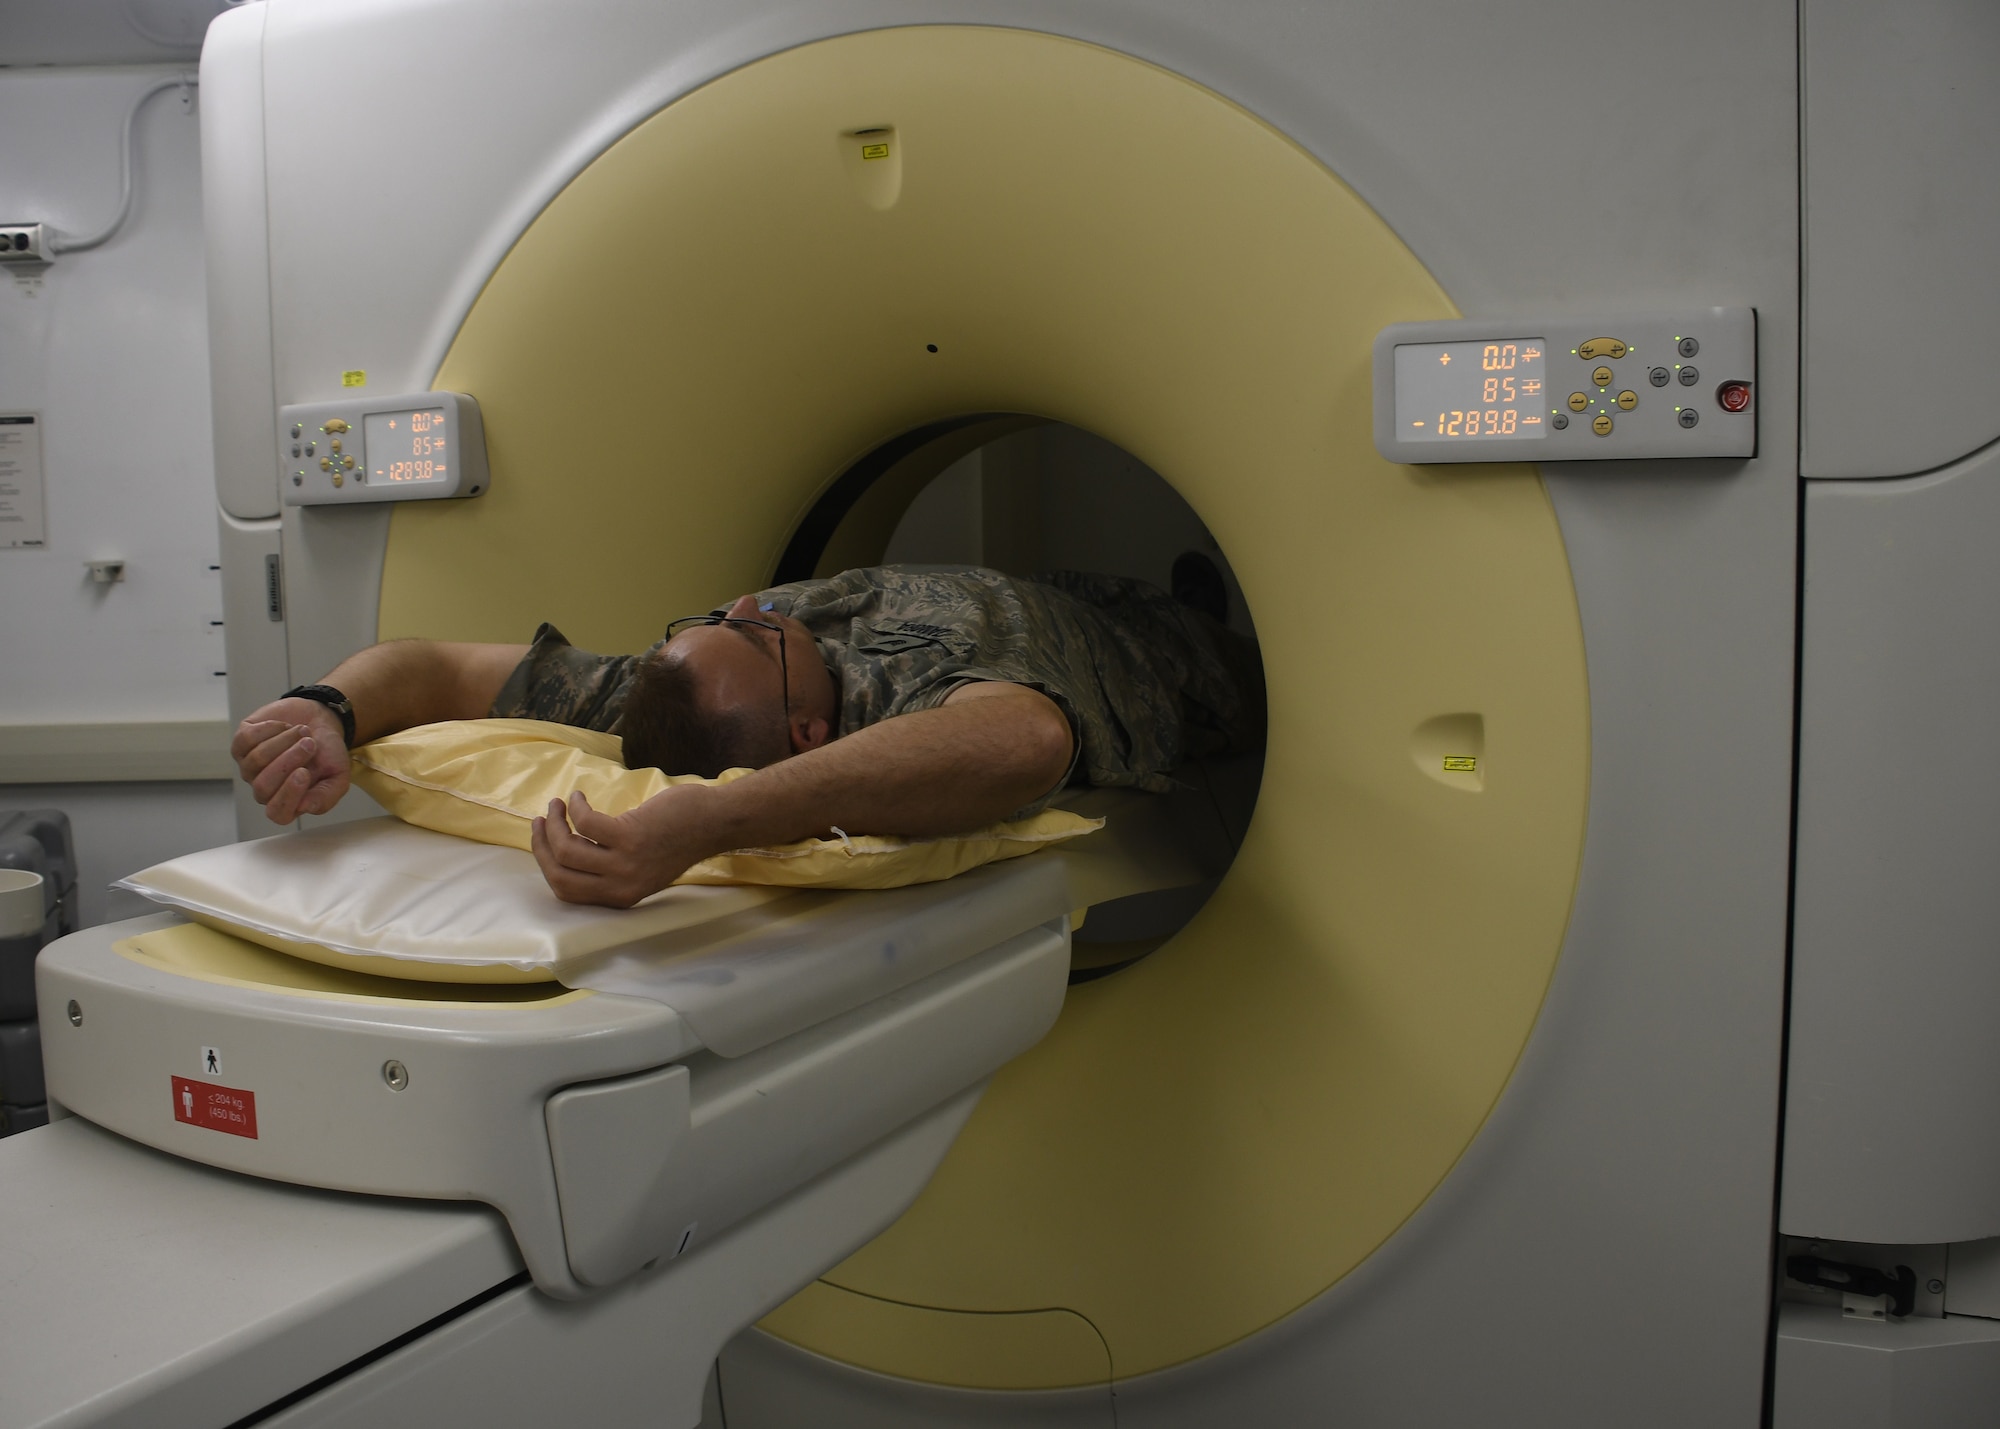 U.S. Air Force Tech. Sgt. Benjamin Zamora, 379th Medical Support Squadron diagnostic sonographer, lies down to test the operability of the new Computed Tomography scanner at Al Udeid Air Base, Qatar, Nov. 21, 2016. The CT scanner utilizes motion and X-ray technology to create a complete 360 degree image of the human body, making it easier for doctors to diagnose any issues that they would not normally be able to see. (U.S. Air Force photo by Senior Airman Miles Wilson)